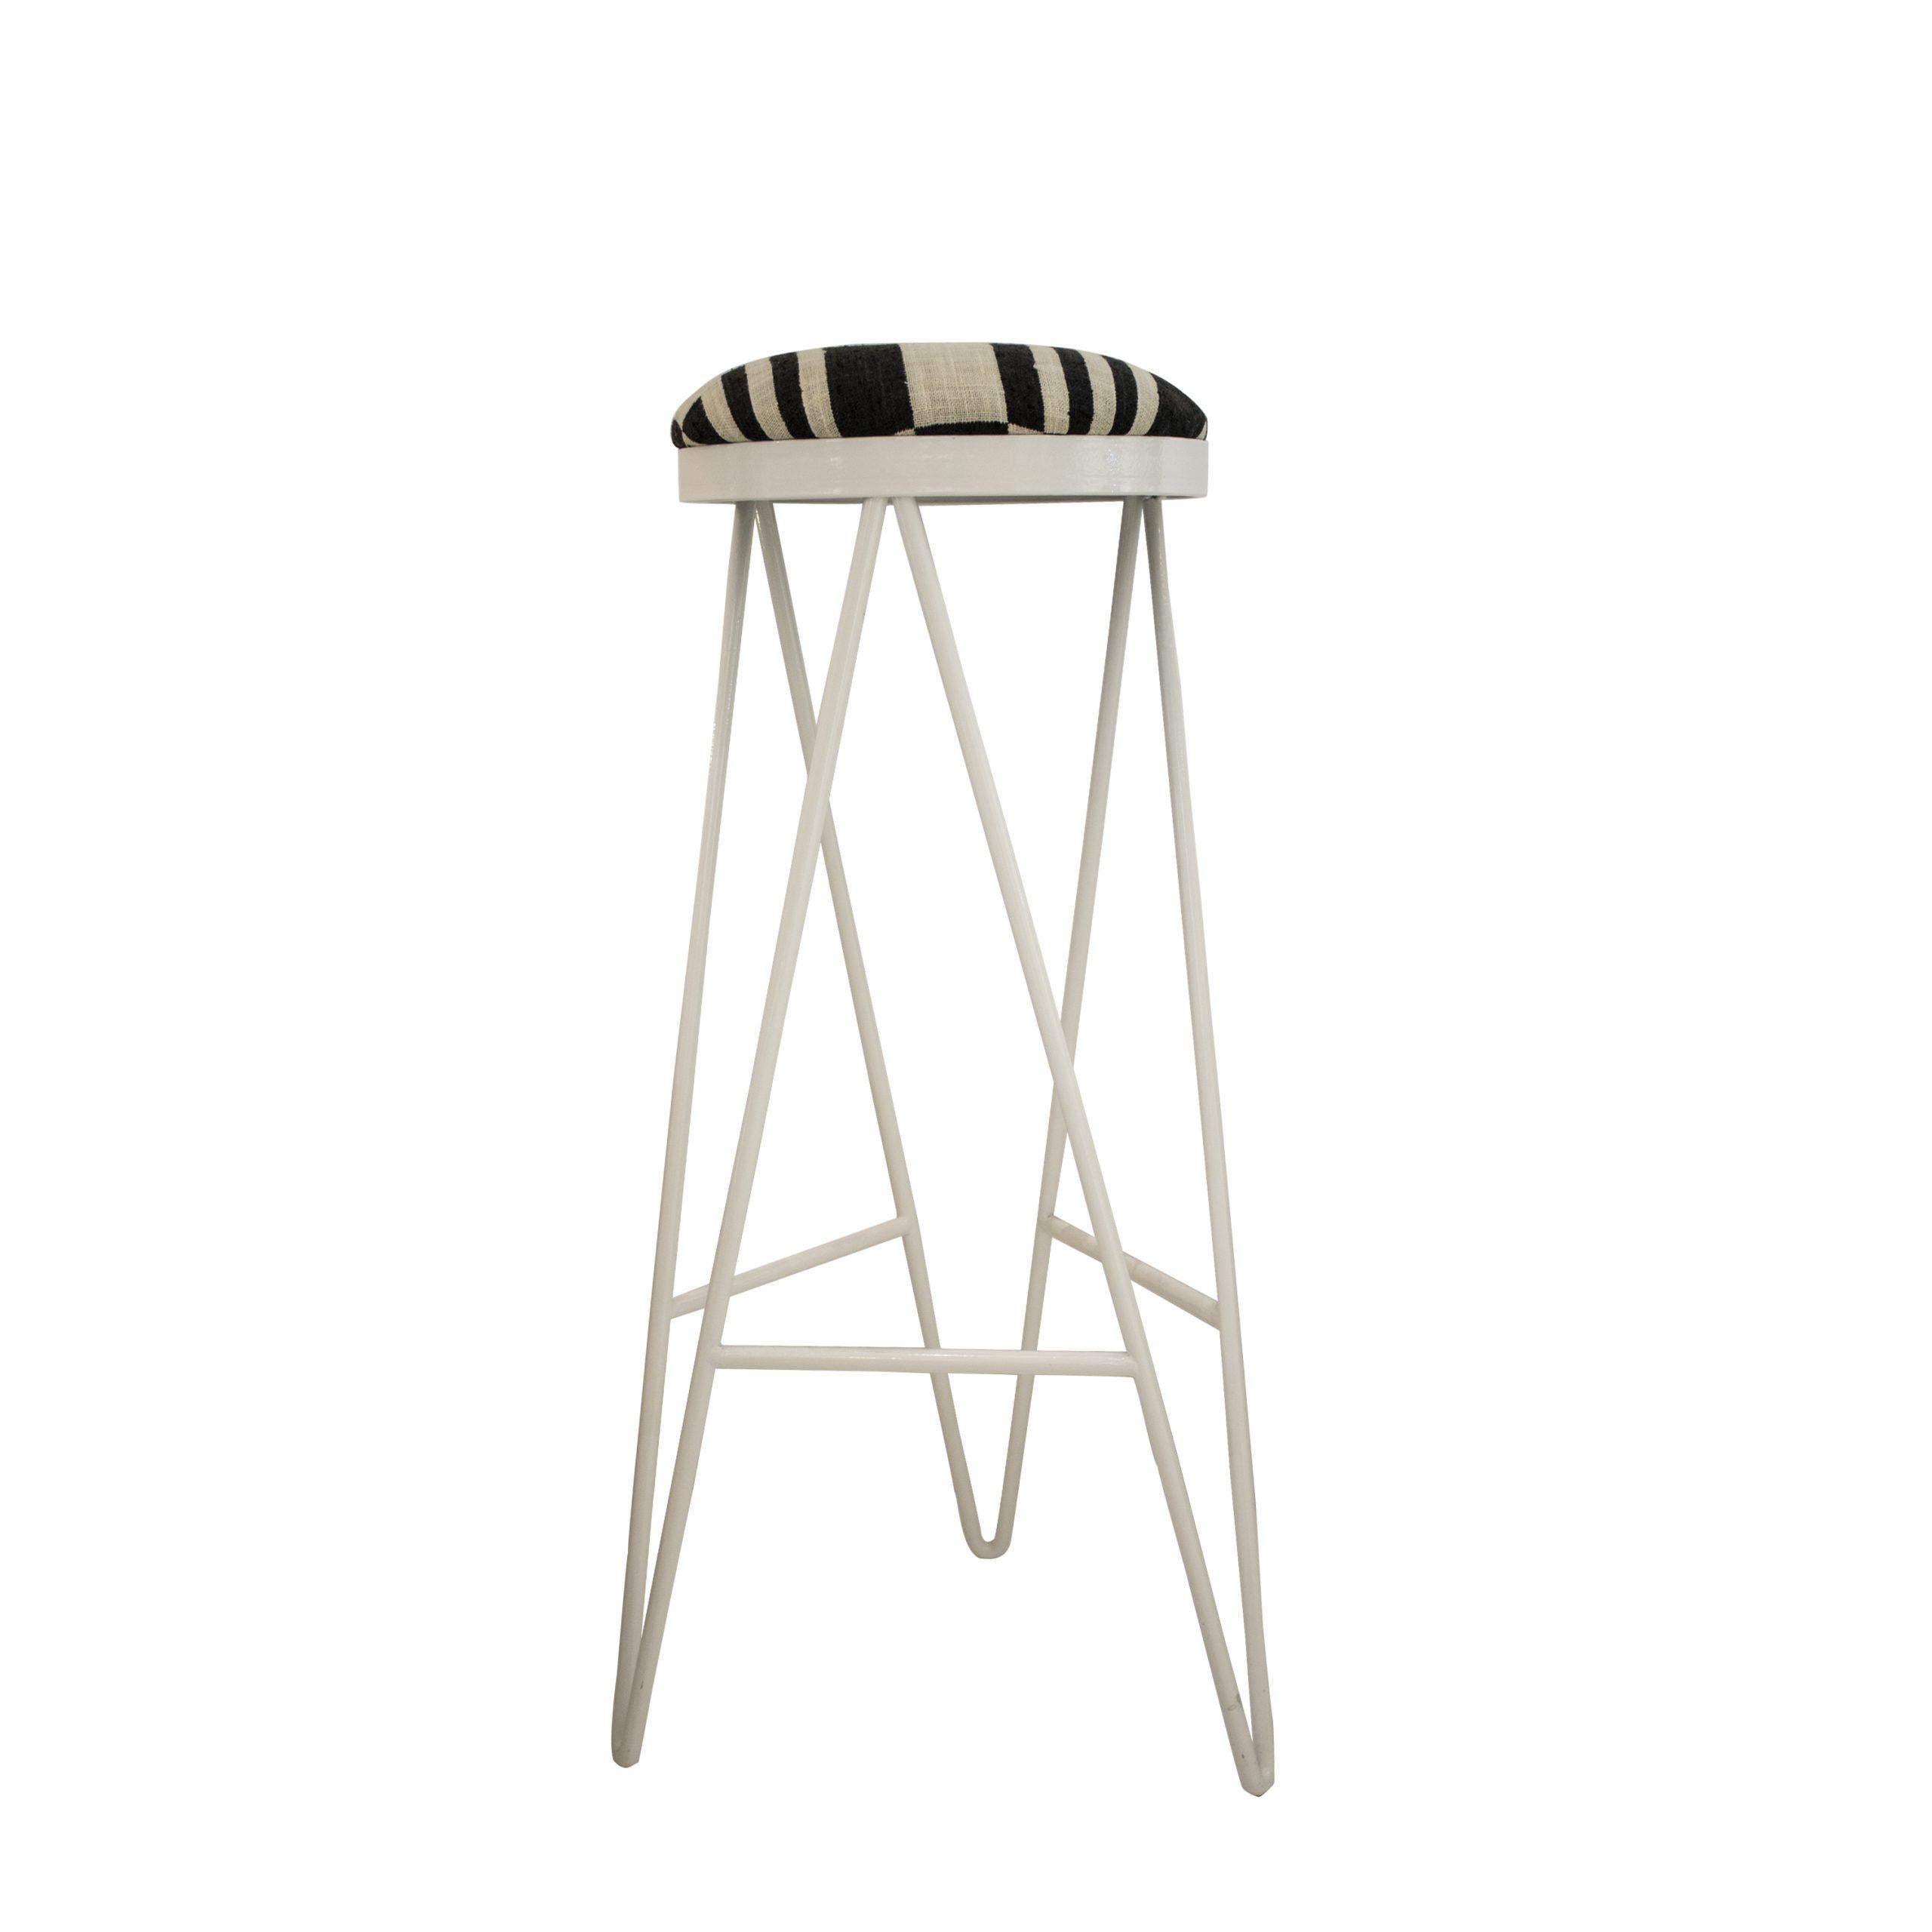 Spanish Contemporary Set of 8 Steel Stool Designed by IKB191 Studio , Spain, 2022 For Sale